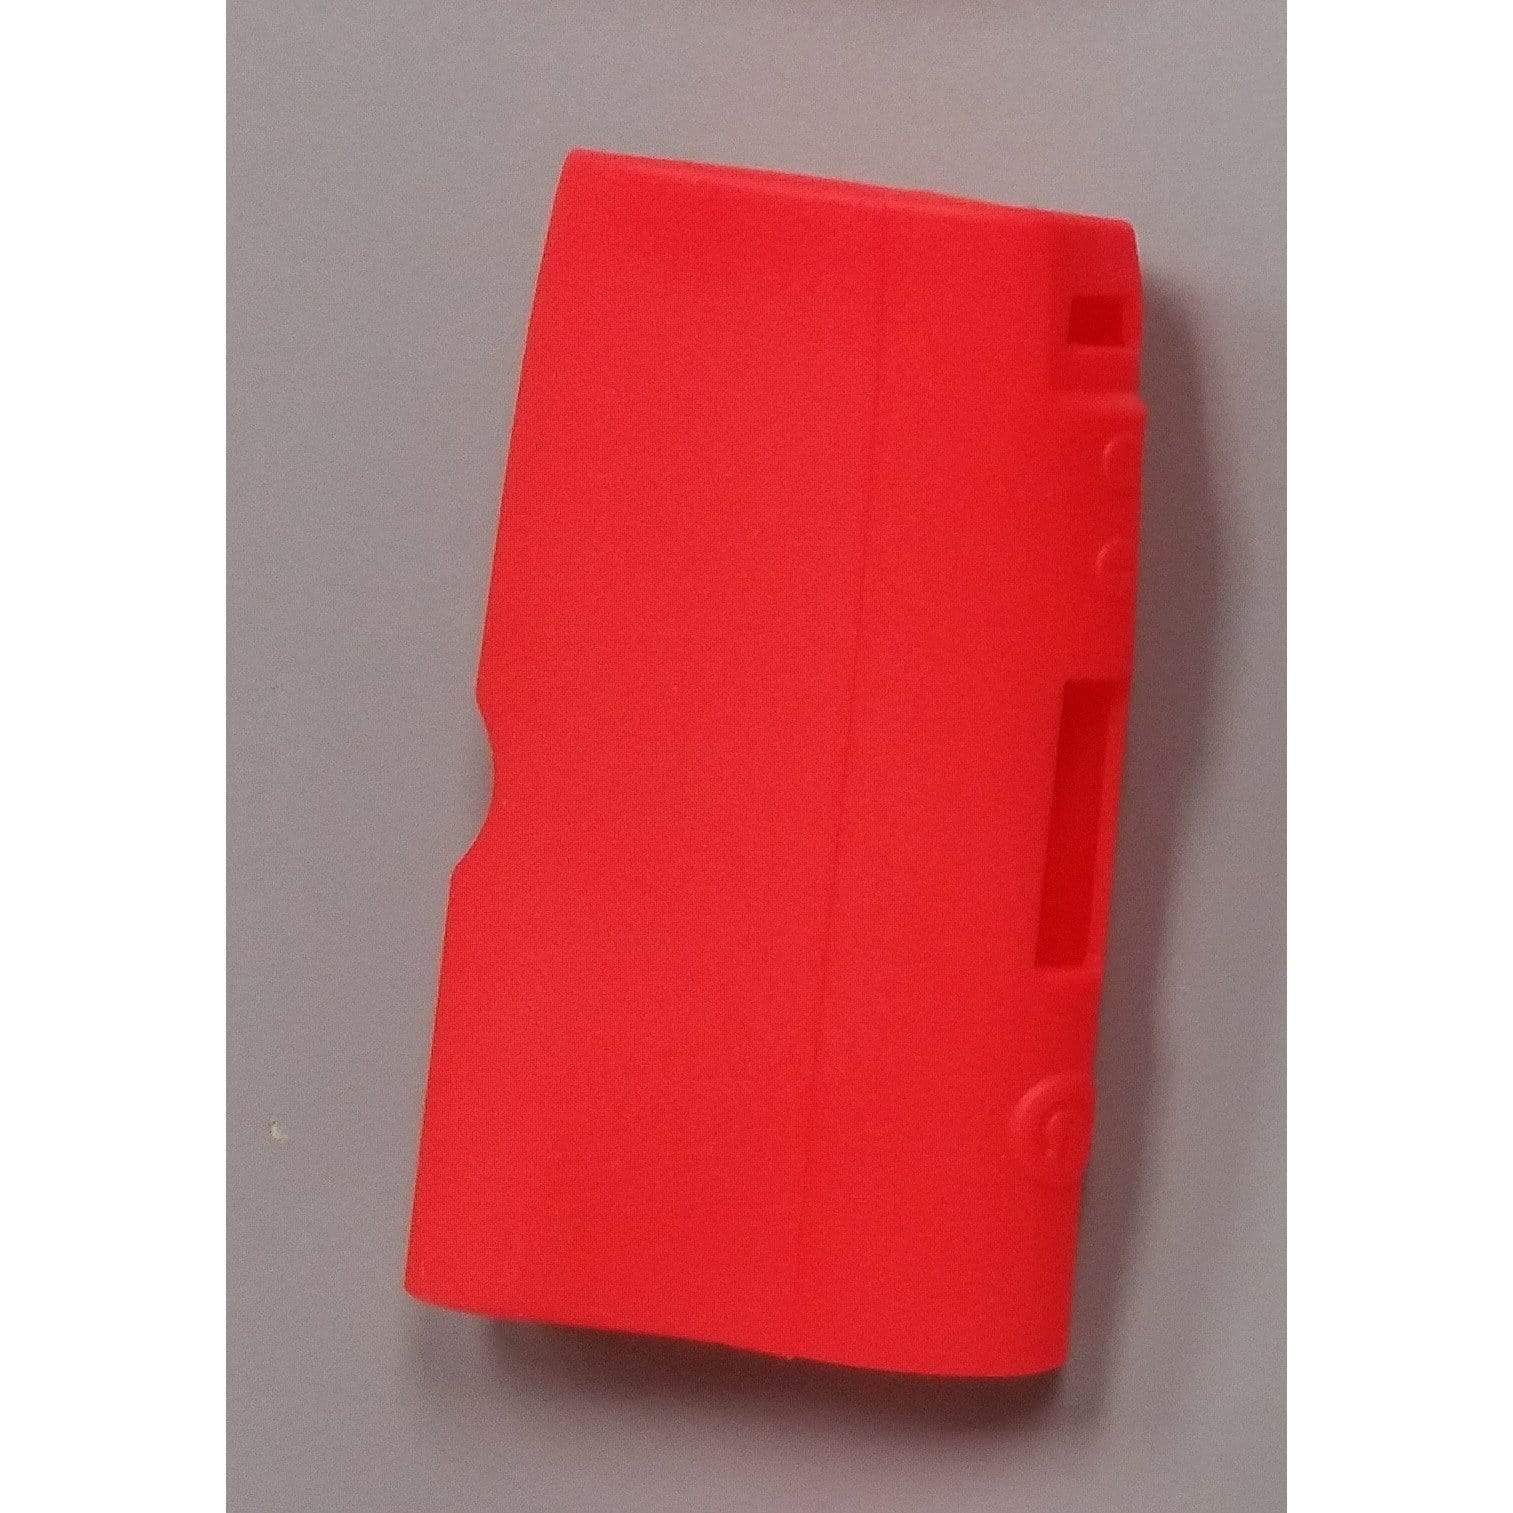 Silicone Sleeve Case for KBOX Mini Red Silicone Cases